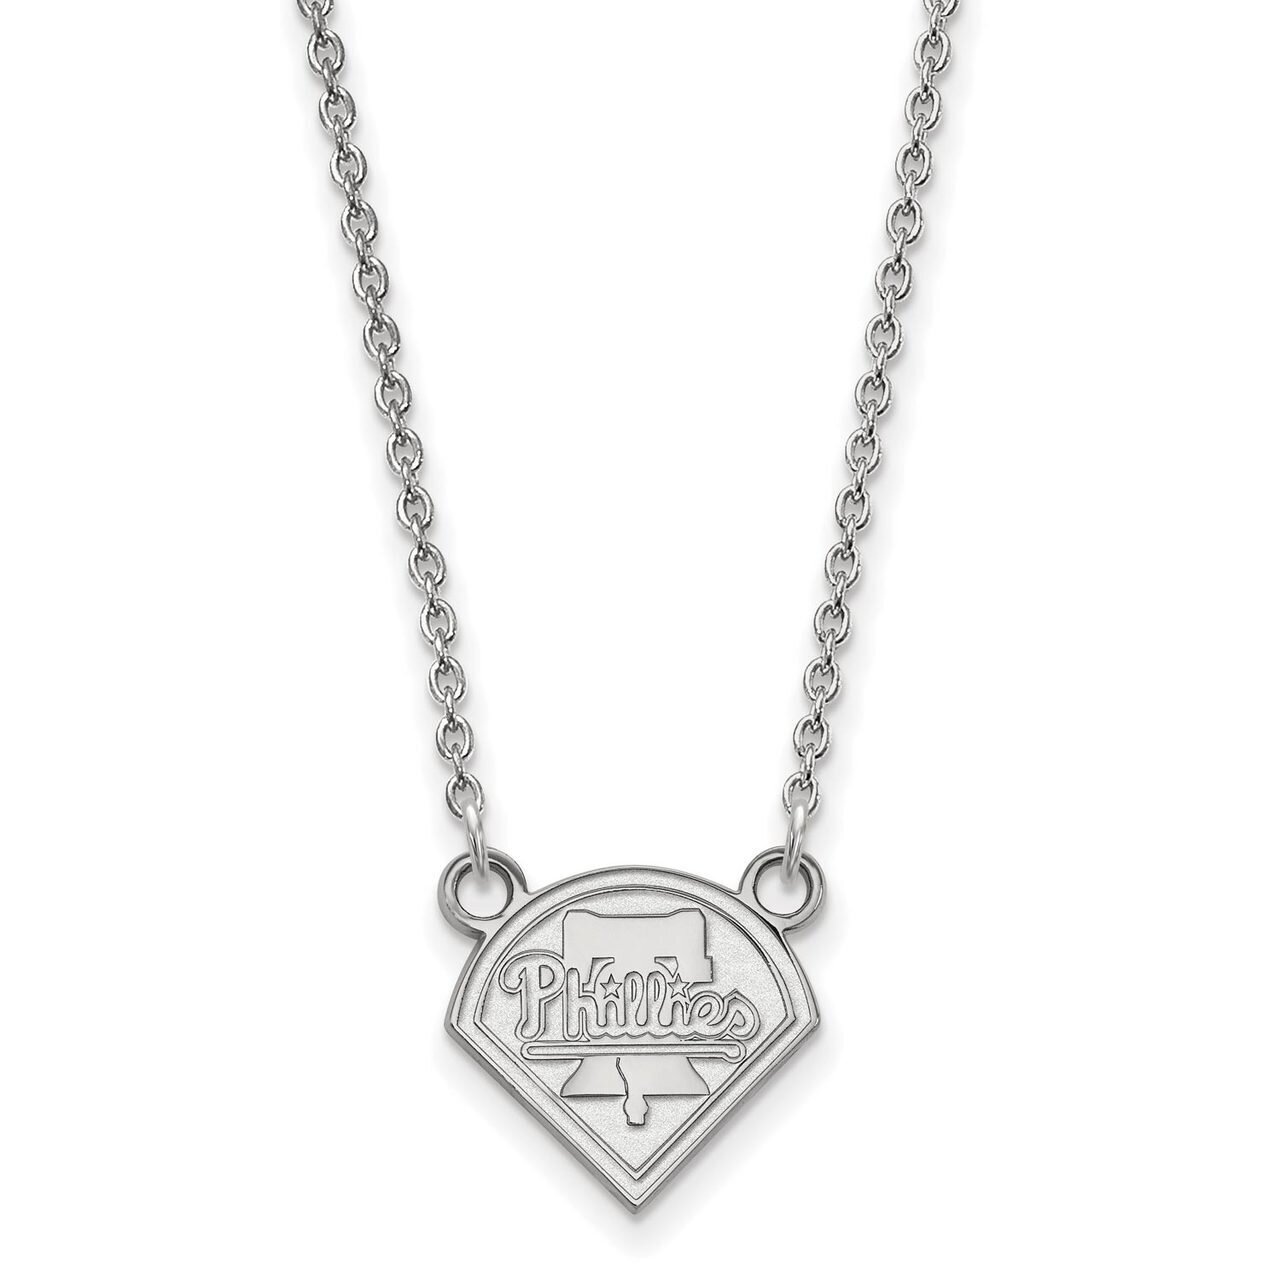 Philadelphia Phillies Small Pendant with Chain Necklace 10k White Gold 1W006PHI-18